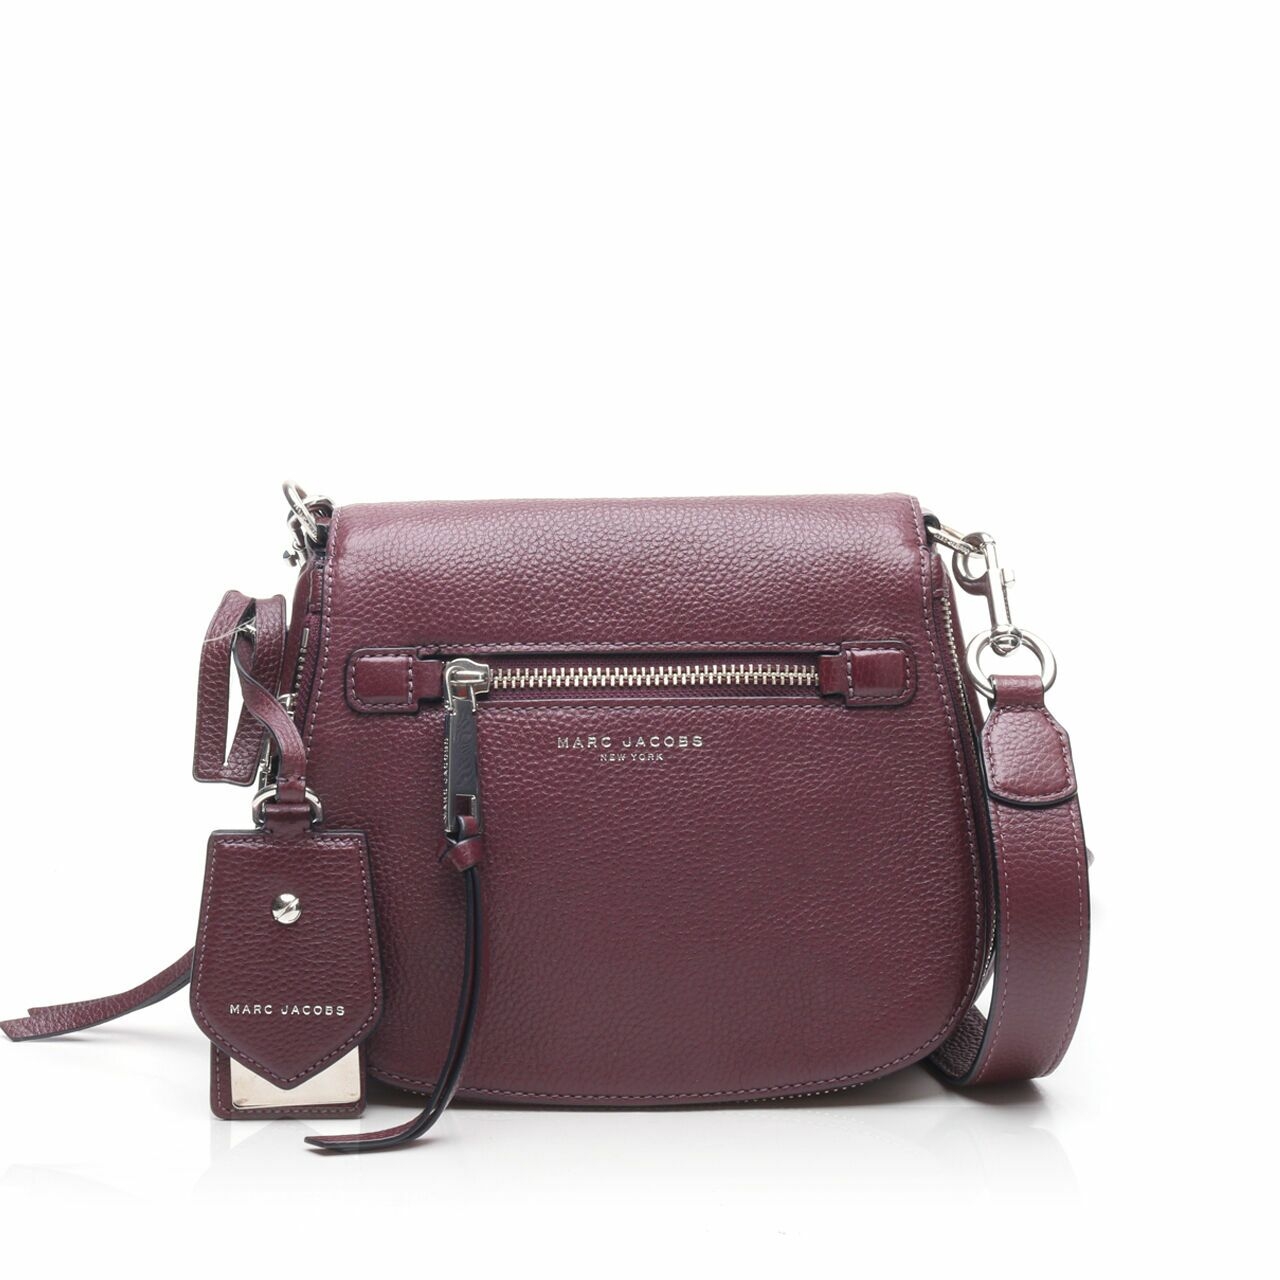 Marc Jacobs Recruit Nomad Blackberry Small Pebbled Leather Saddle Bag